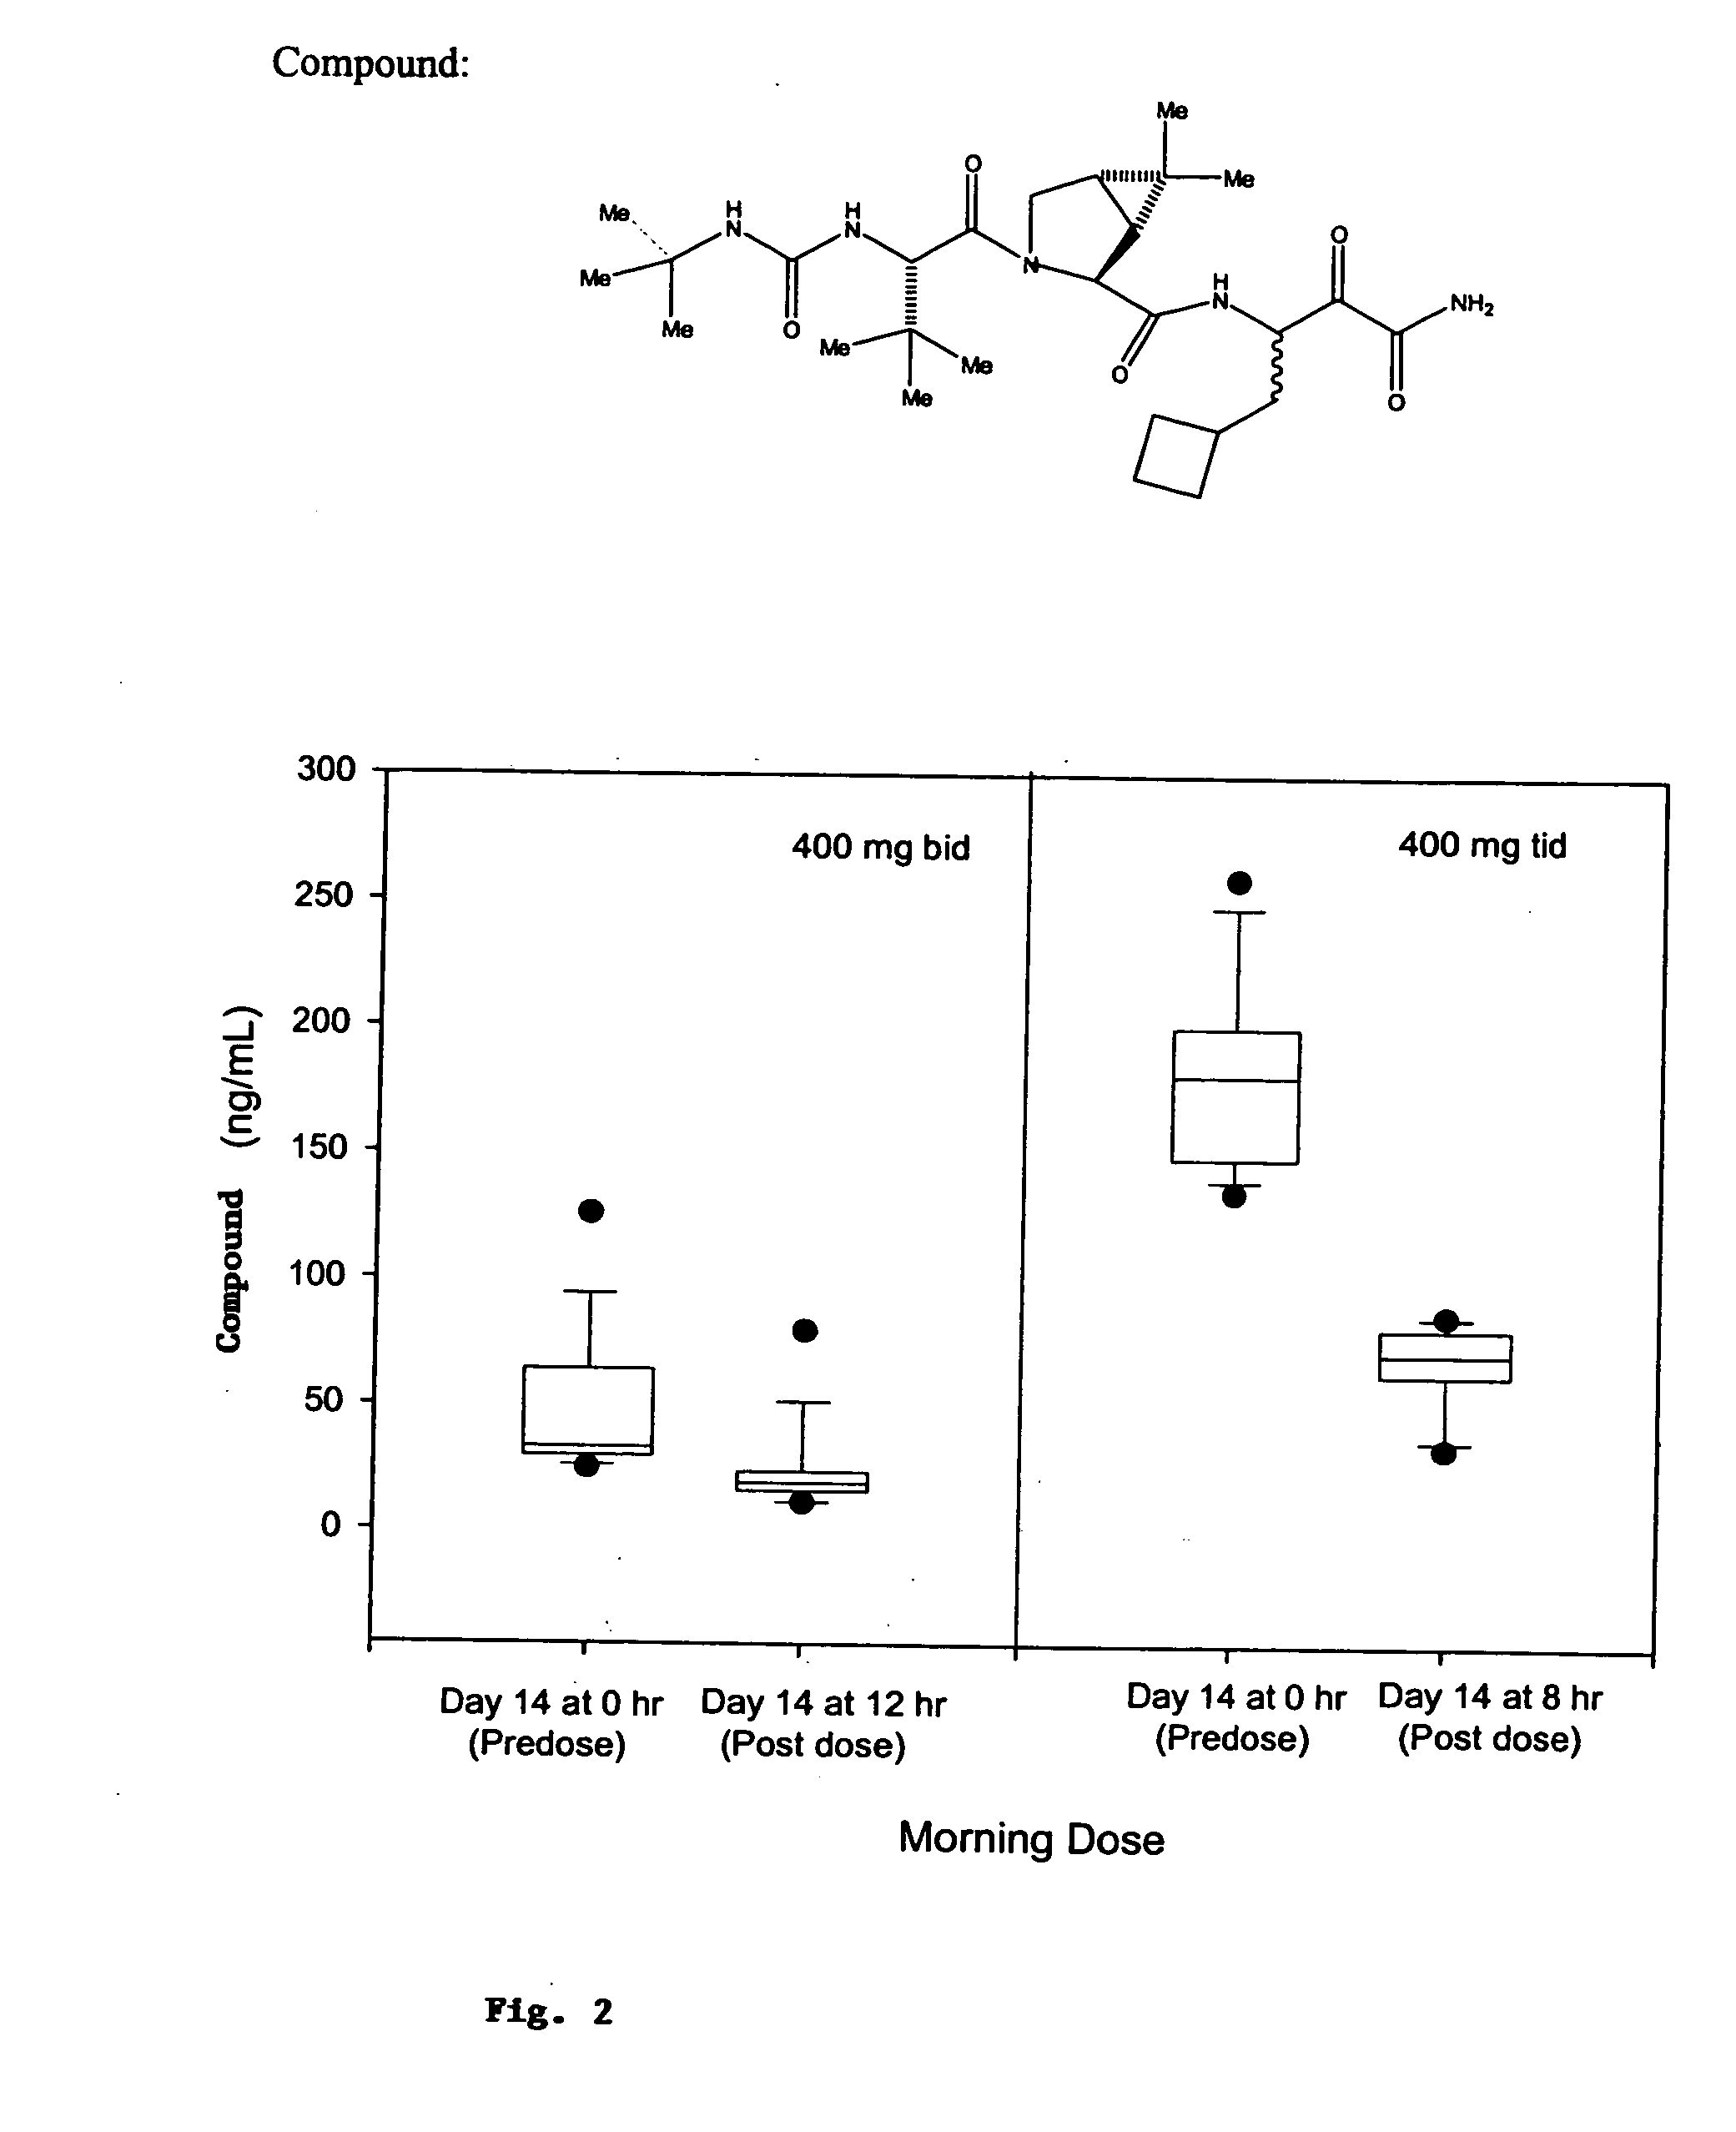 Controlled-release formulation